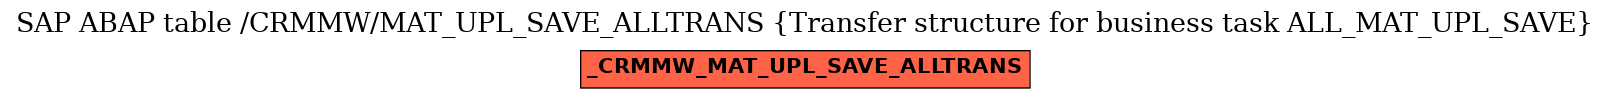 E-R Diagram for table /CRMMW/MAT_UPL_SAVE_ALLTRANS (Transfer structure for business task ALL_MAT_UPL_SAVE)